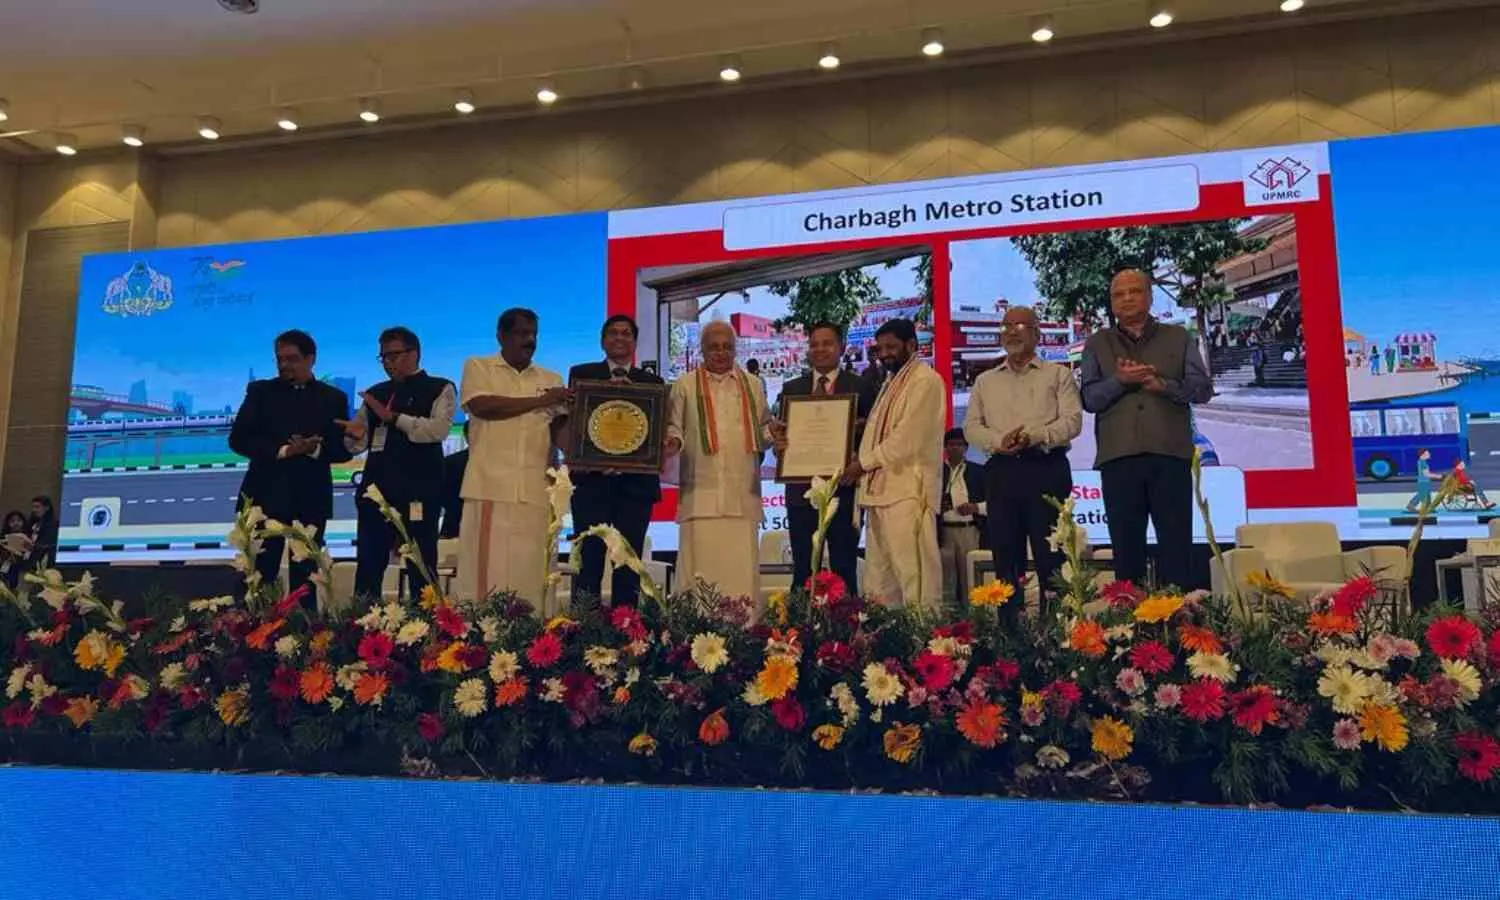 Lucknow Metro Wins UMI Award for Excellence in Multi Modal Connectivity and Urban Transport In Kochi